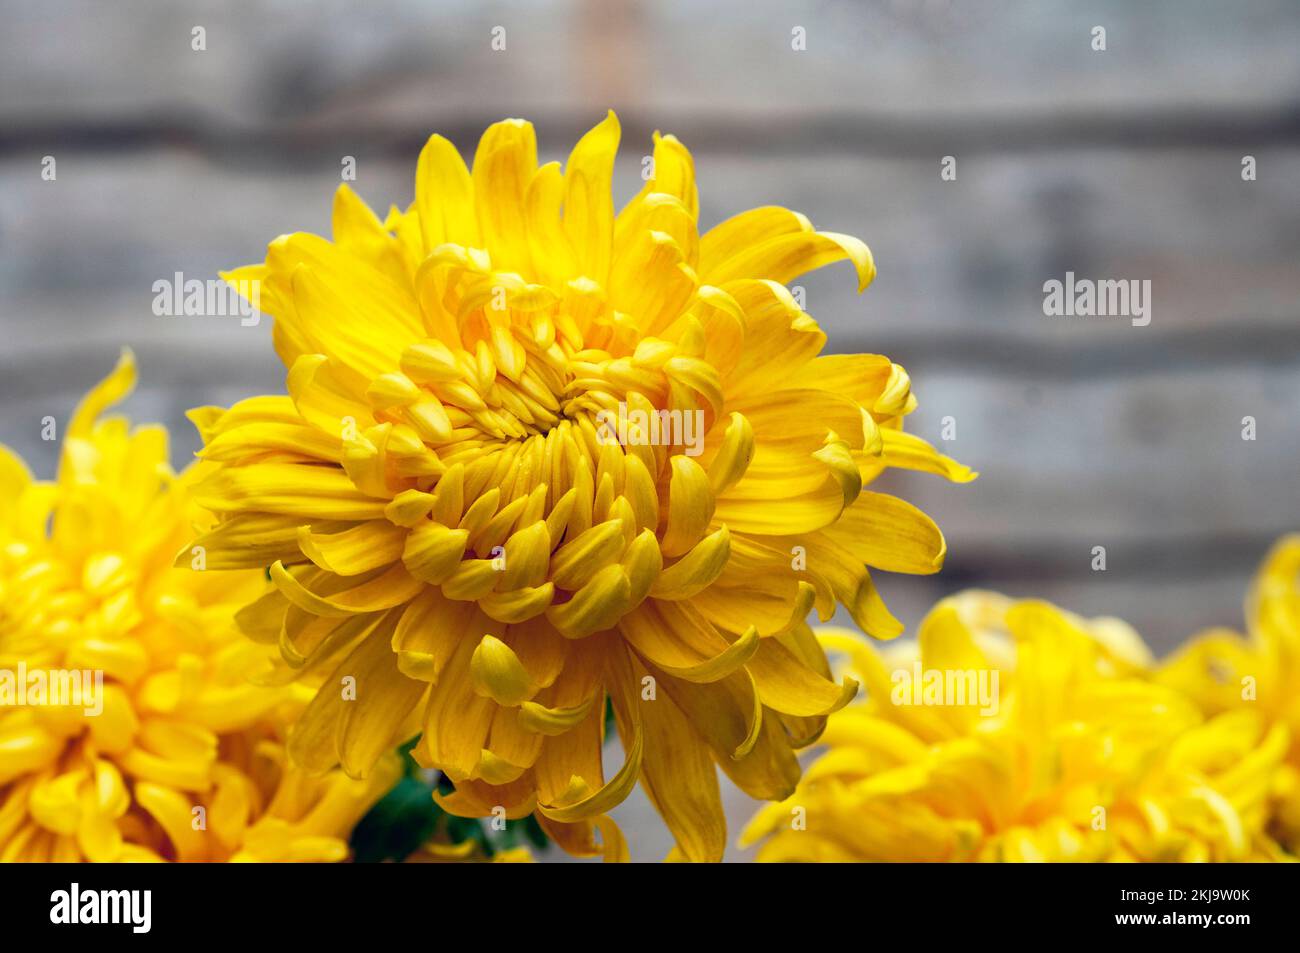 Close up of a group of non - disbudded Chrysanthemum / Dendranthema Cheddar a deep yellow incurve that flowers in late summer and autumn Stock Photo